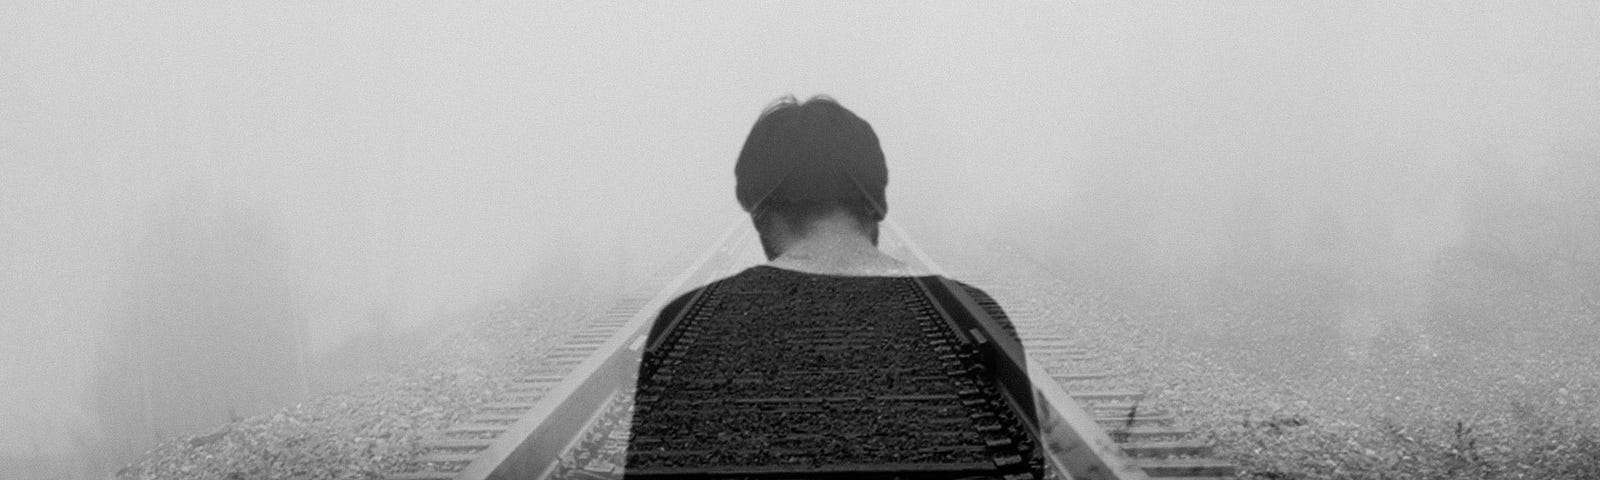 Greyscale photo of man wearing black tshirt, deeply in thought over a railway line